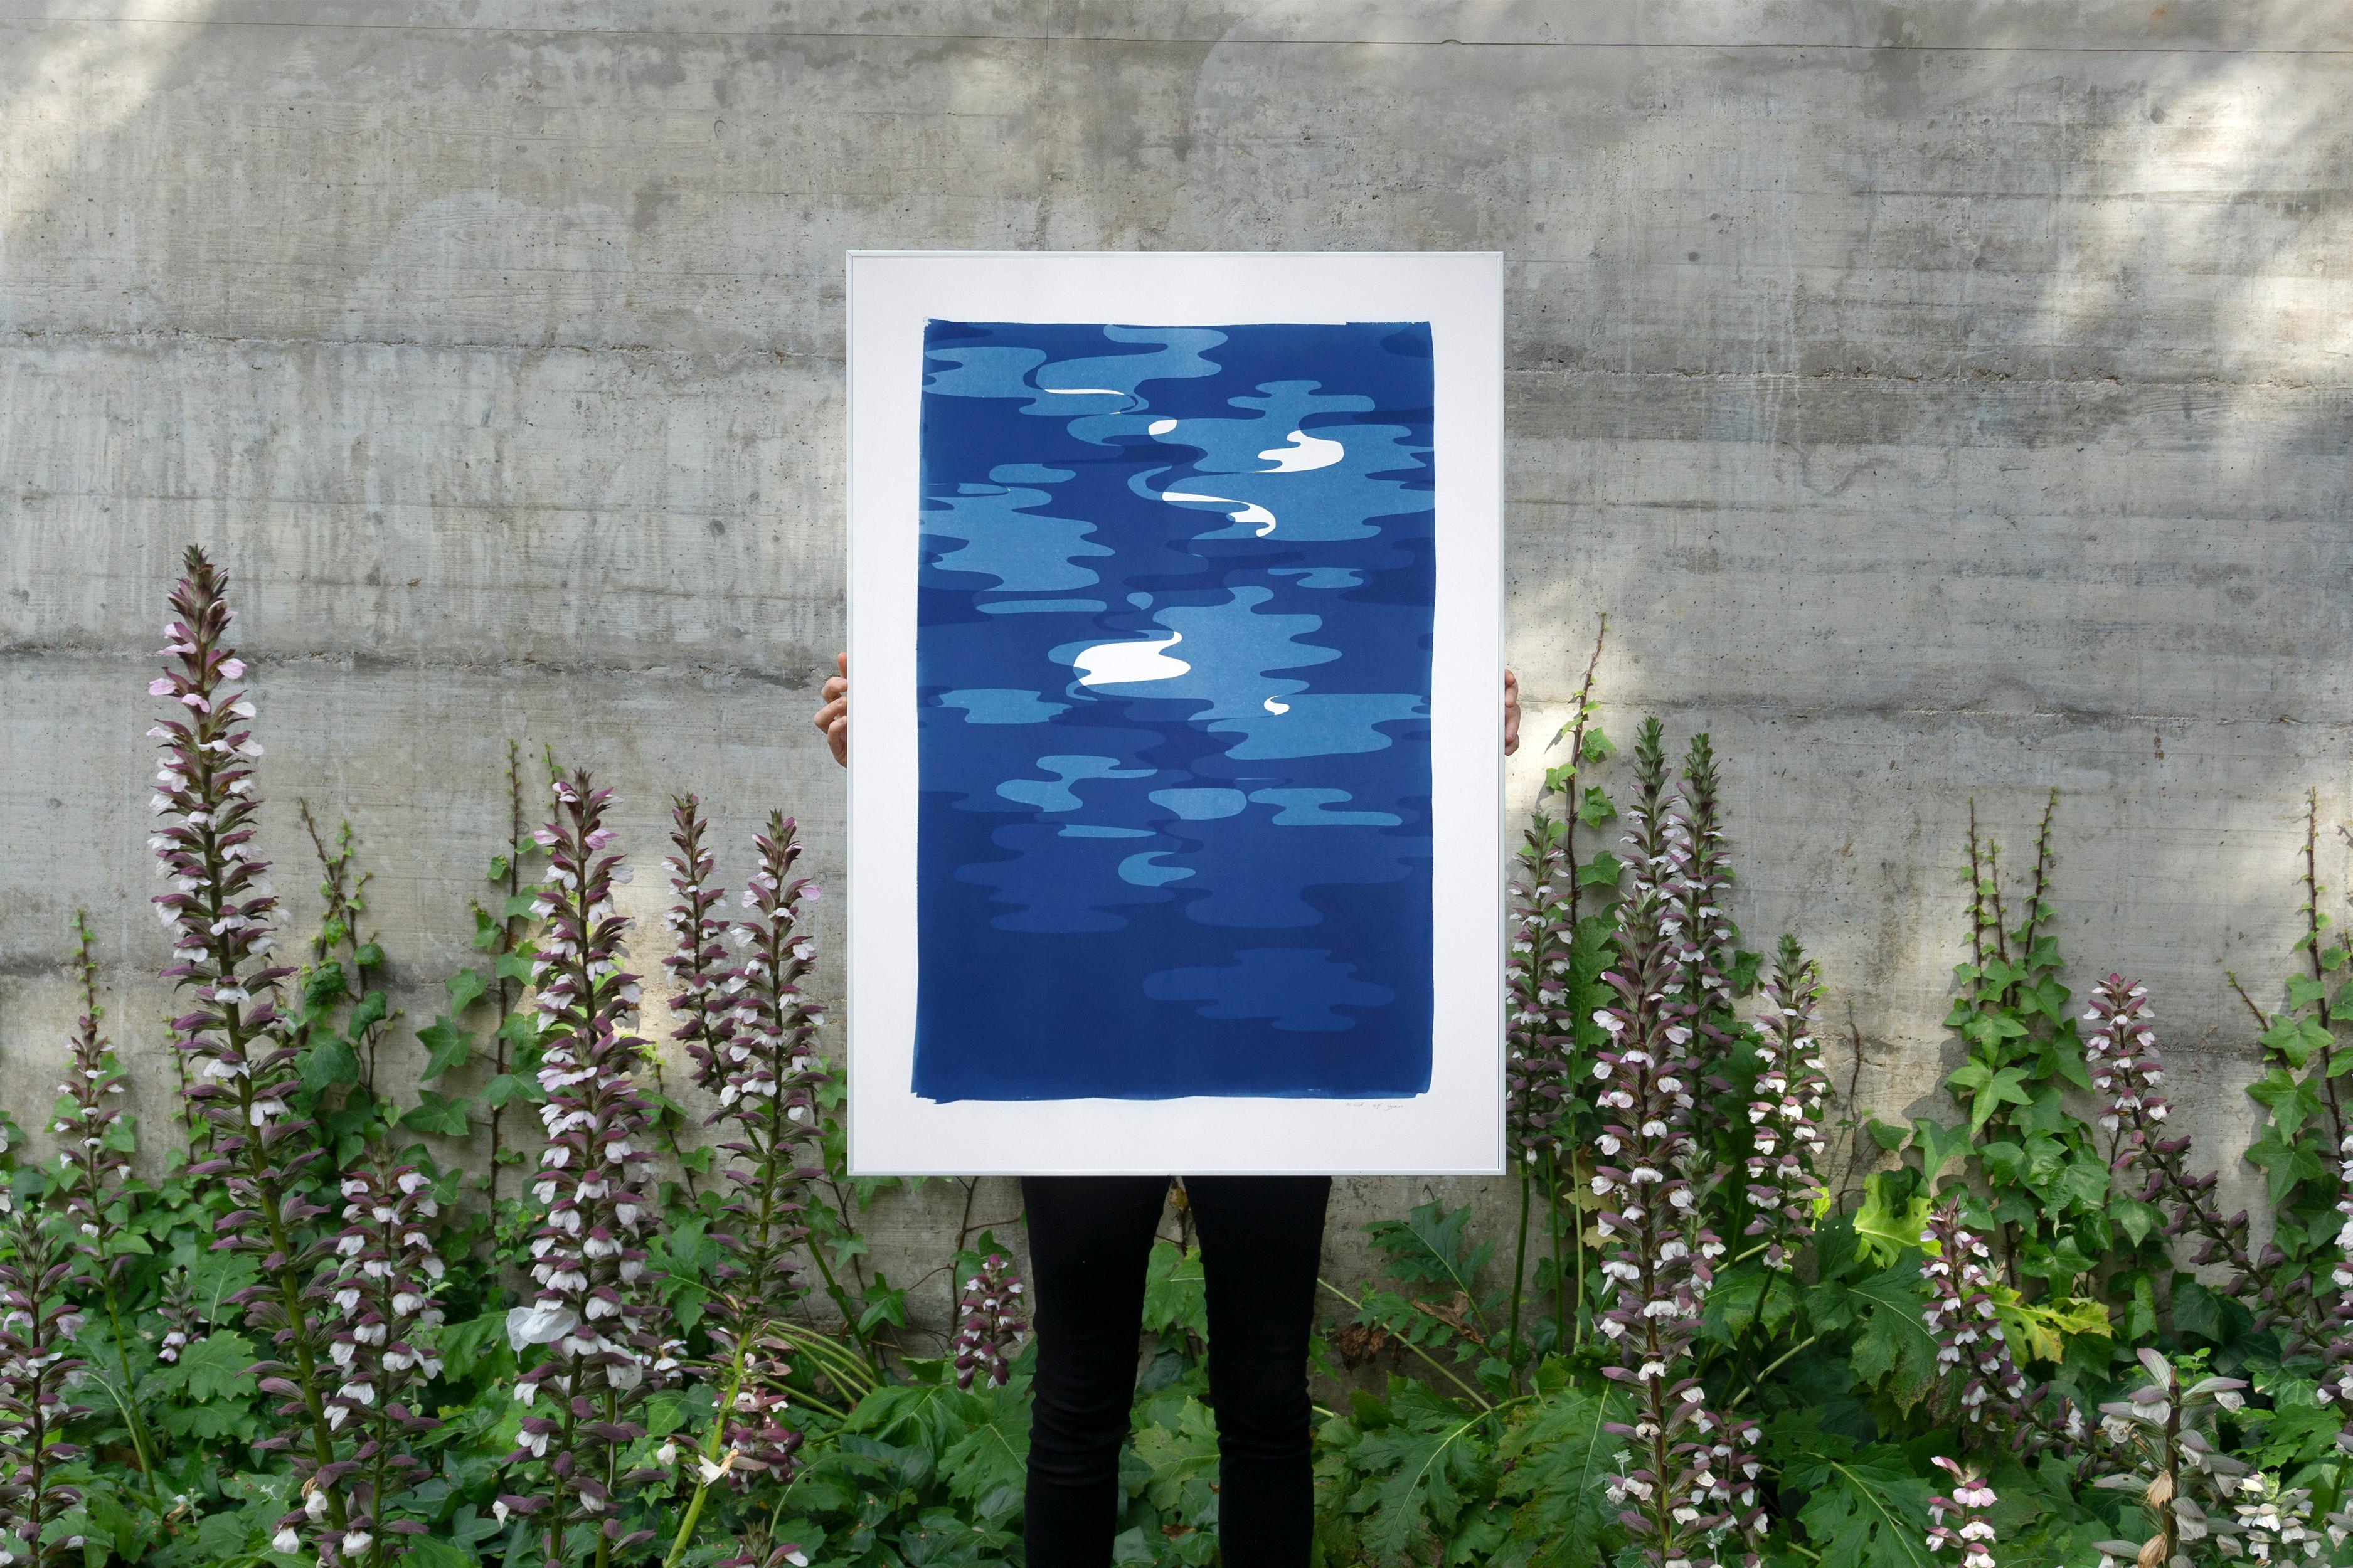 Vertical Geometric Water Reflections , Original Cutout Monotype in Blue Tones - Photograph by Kind of Cyan